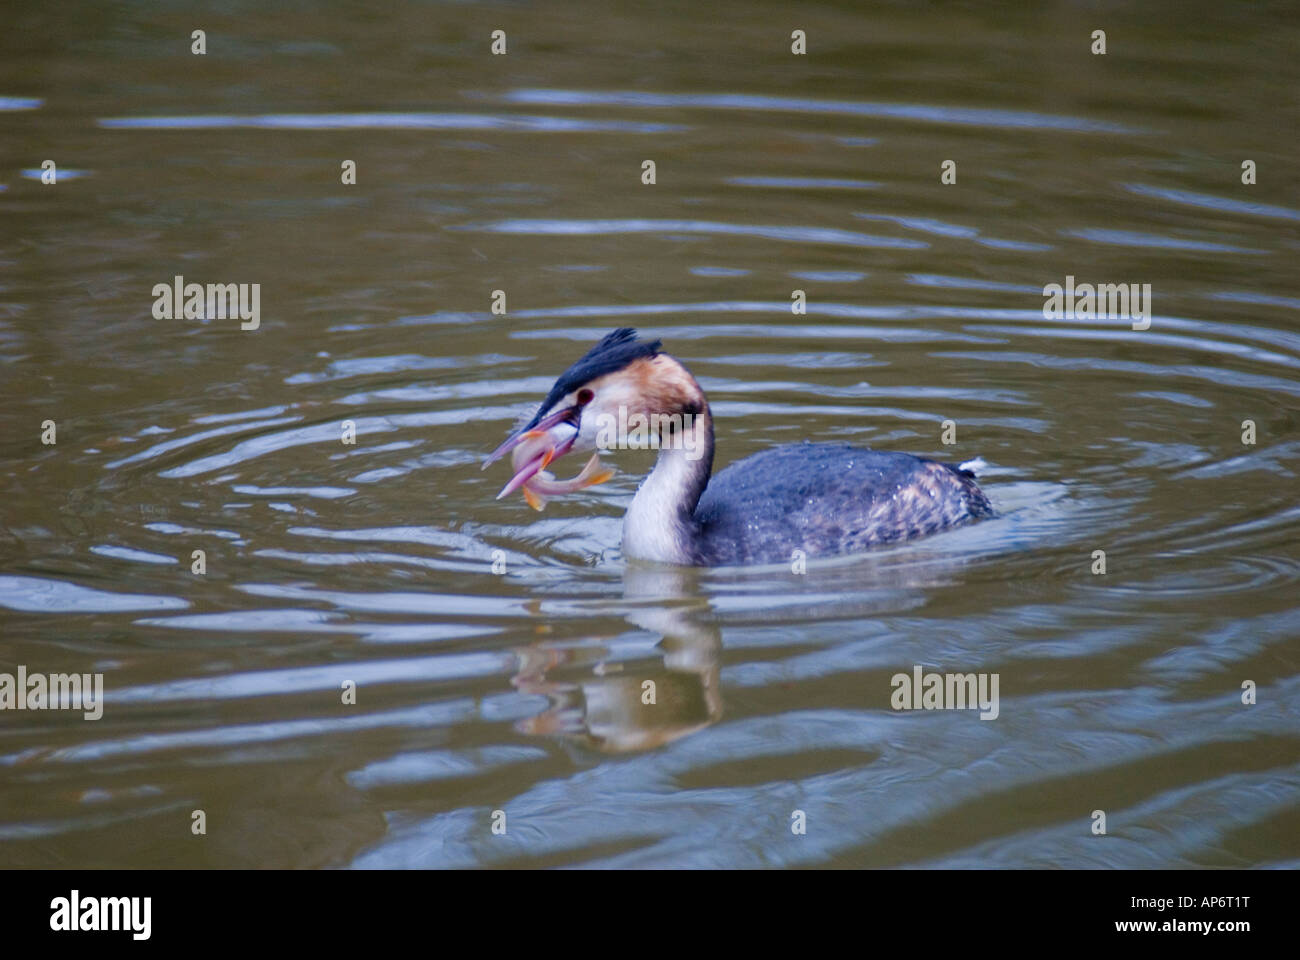 Great Crested Grebe with a Perch in its mouth Podiceps cristatus Stock Photo